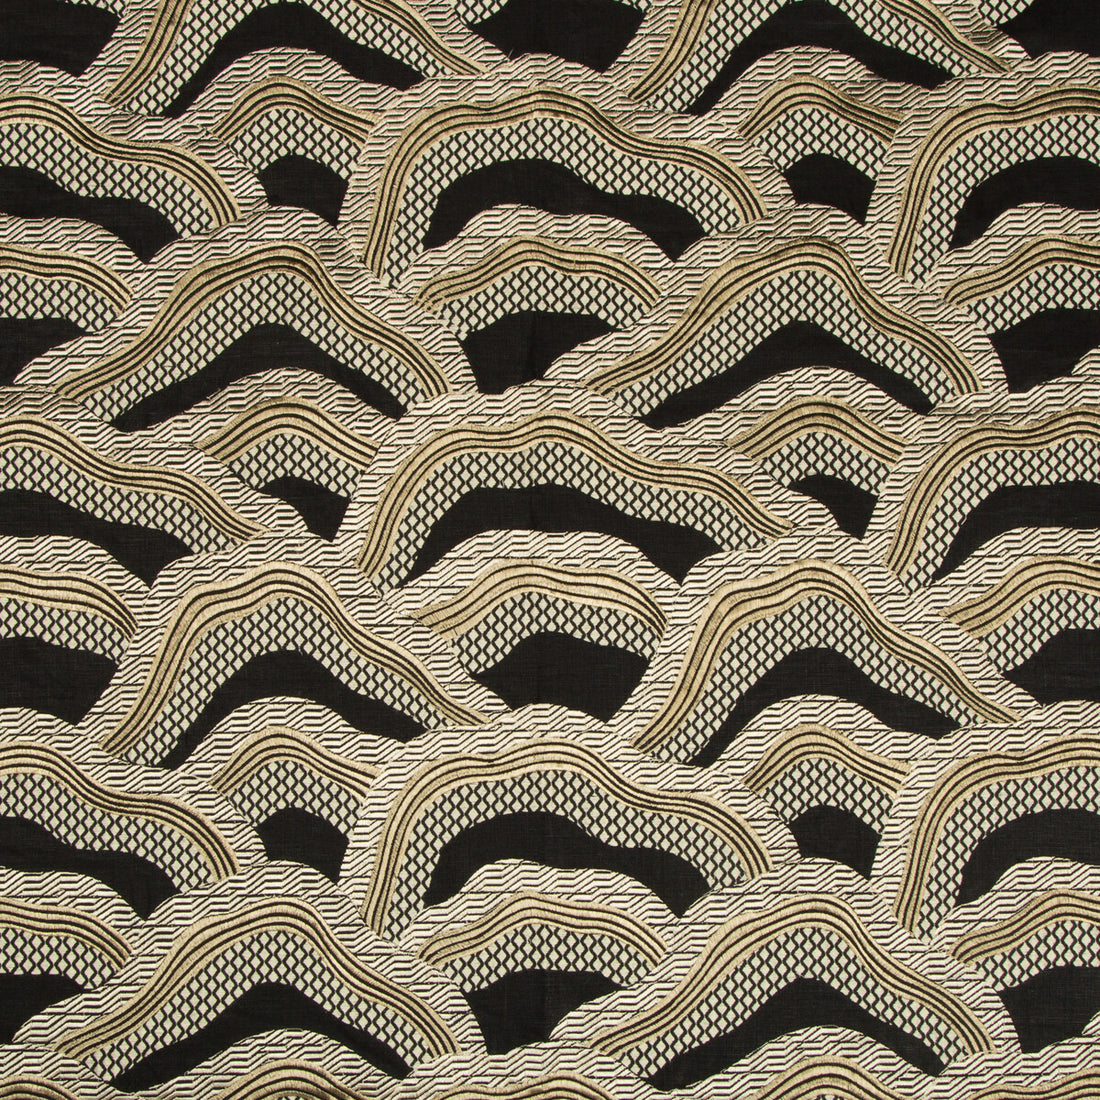 Les Rizieres Emb fabric in black/gold color - pattern 8017127.48.0 - by Brunschwig &amp; Fils in the Les Ensembliers collection